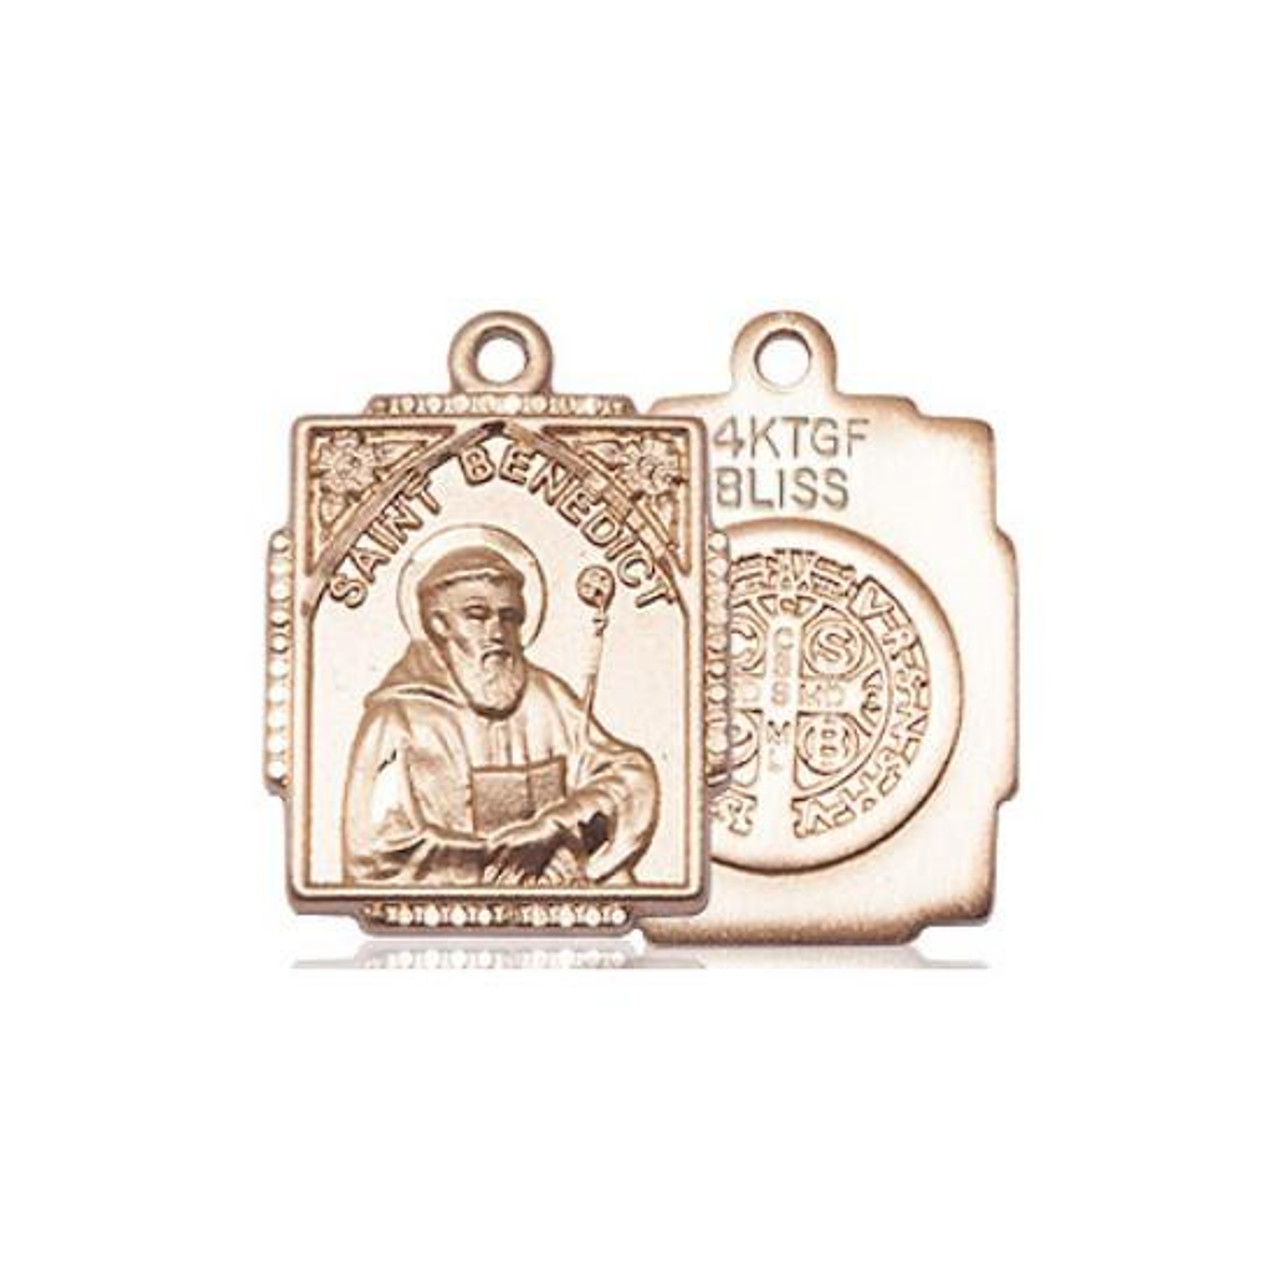 St. Benedict Medal - 14kt Gold Round Pendant (2 Sizes)